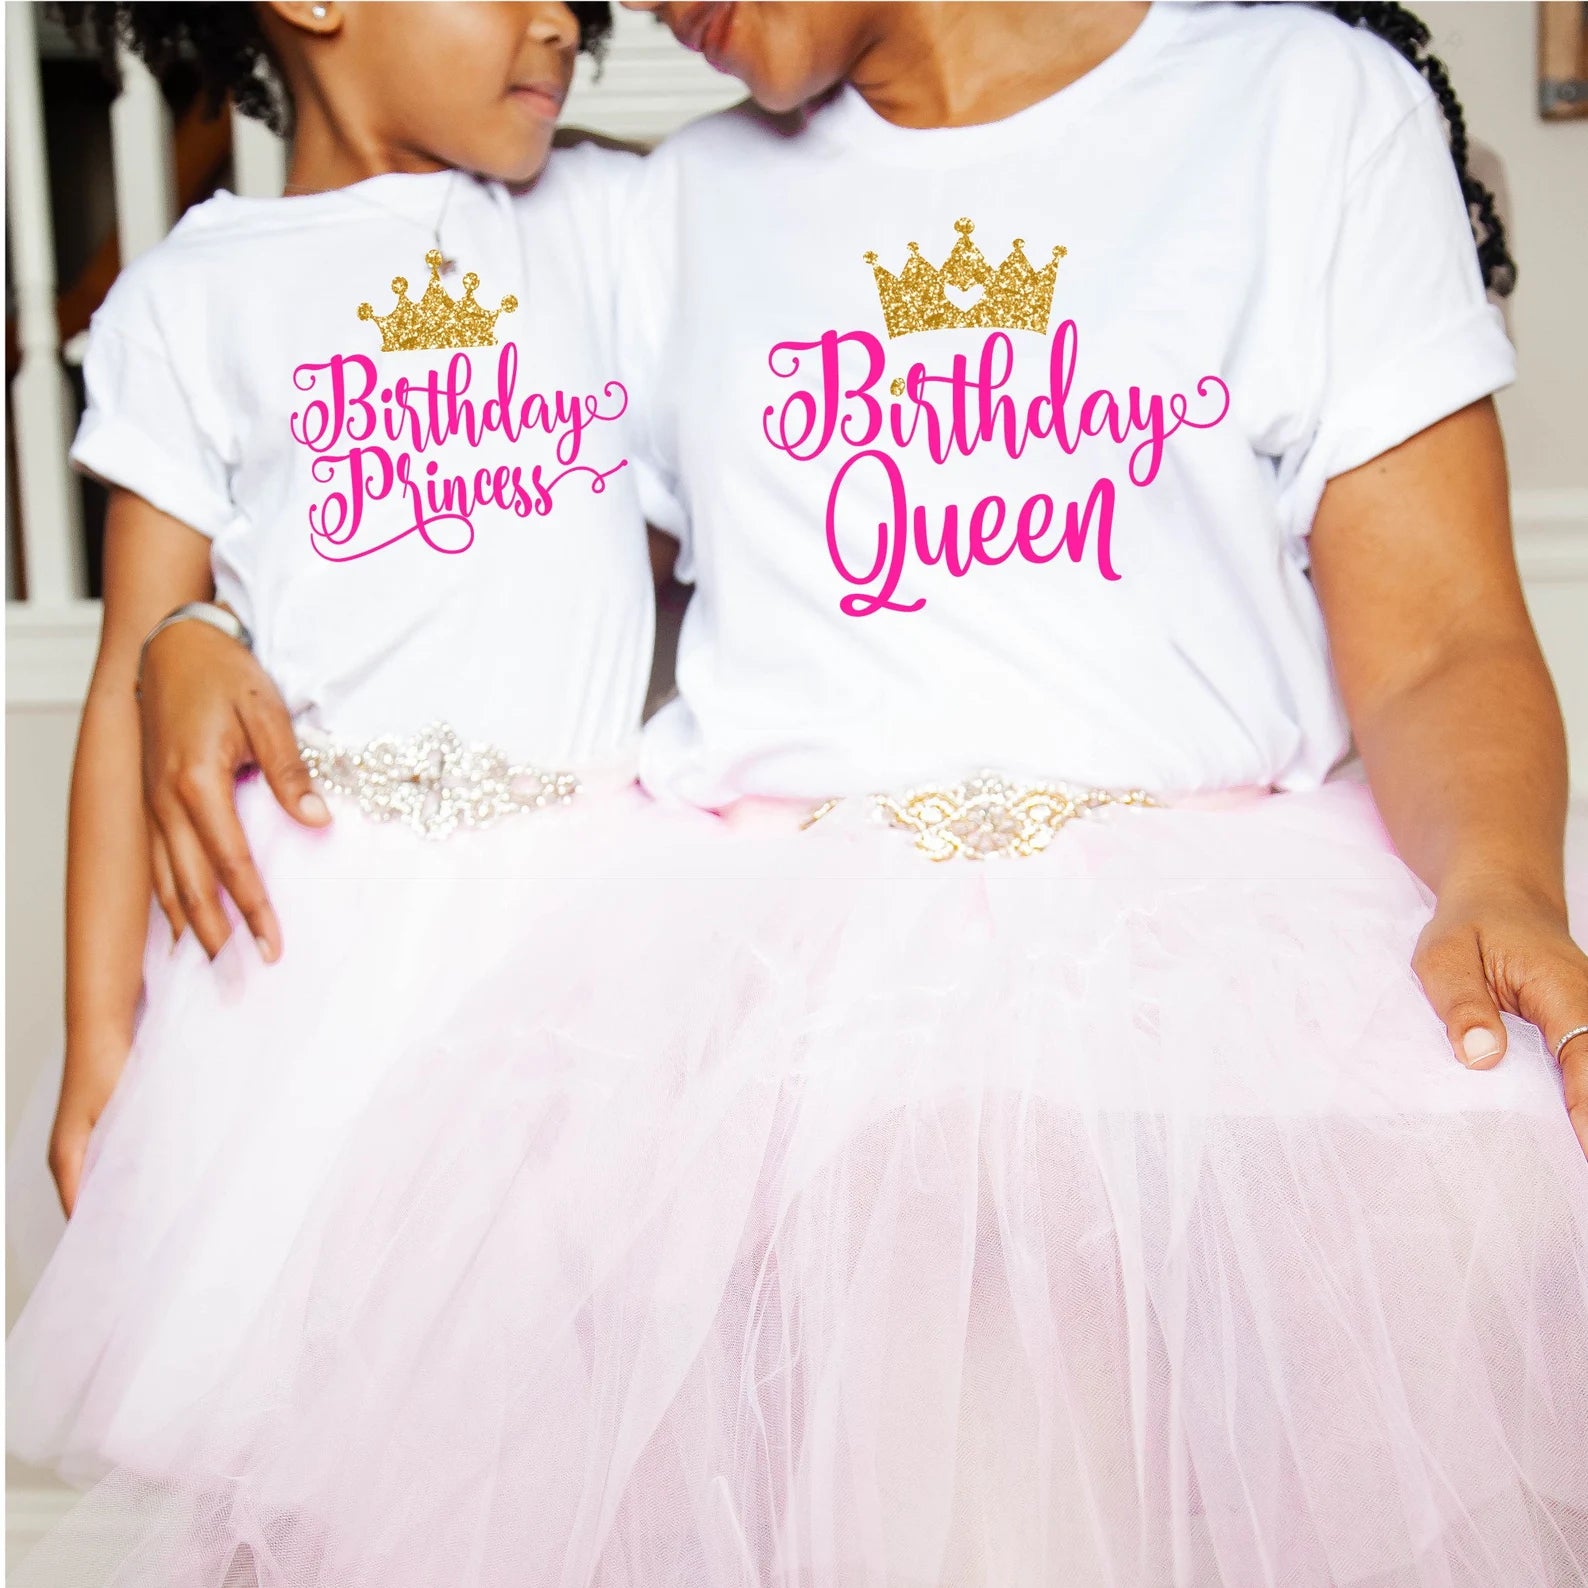 Matching Mommy and Me Girls Pink Crown Birthday Queen and Princess Tshirts